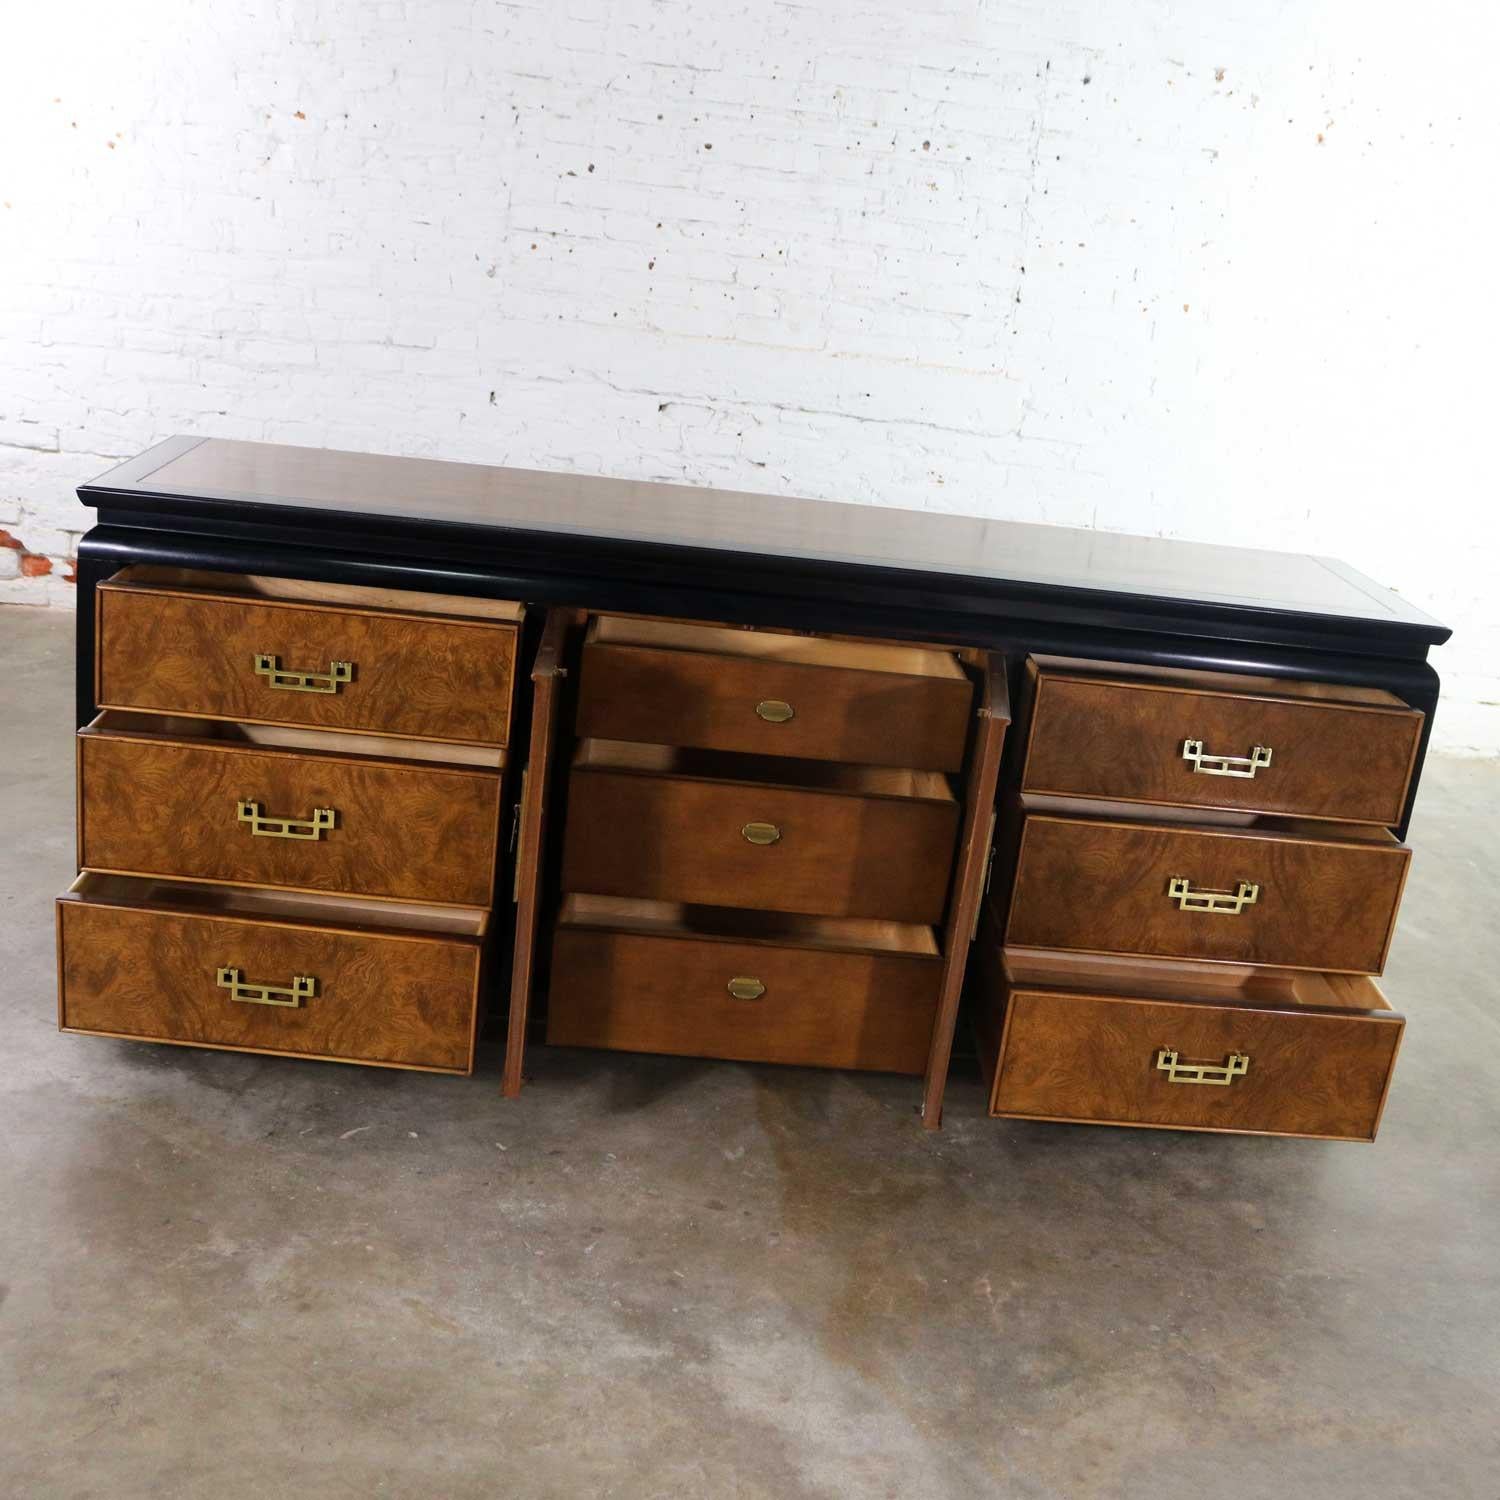 Maple Vintage Chin Hua Low Dresser Credenza by Raymond K. Sobota for Century Furniture